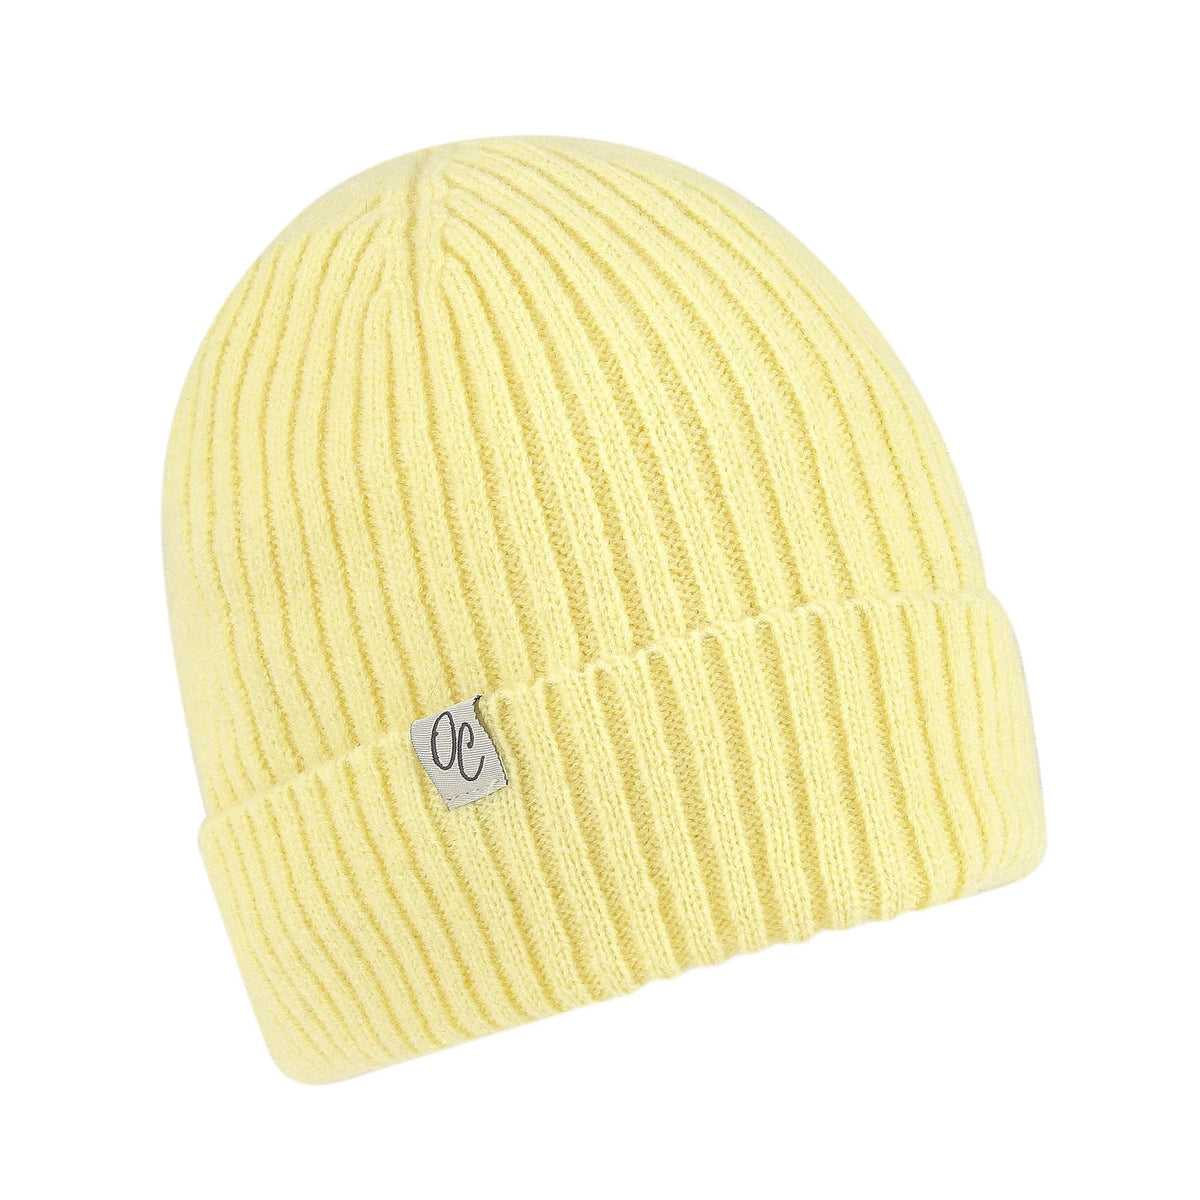 Only Curls Satin Lined Spring Beanie Hat - Lemon - Only Curls